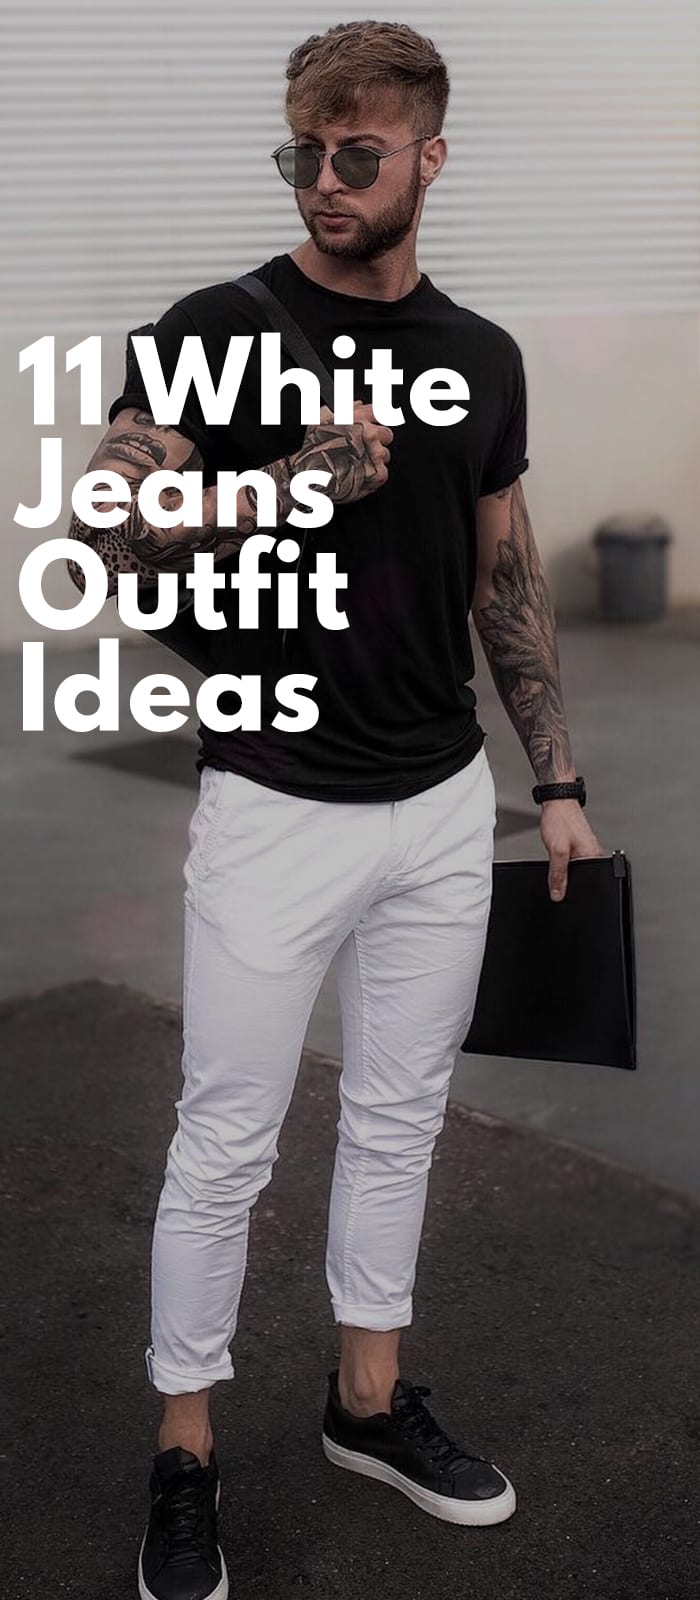 White Jeans Outfits For Men.